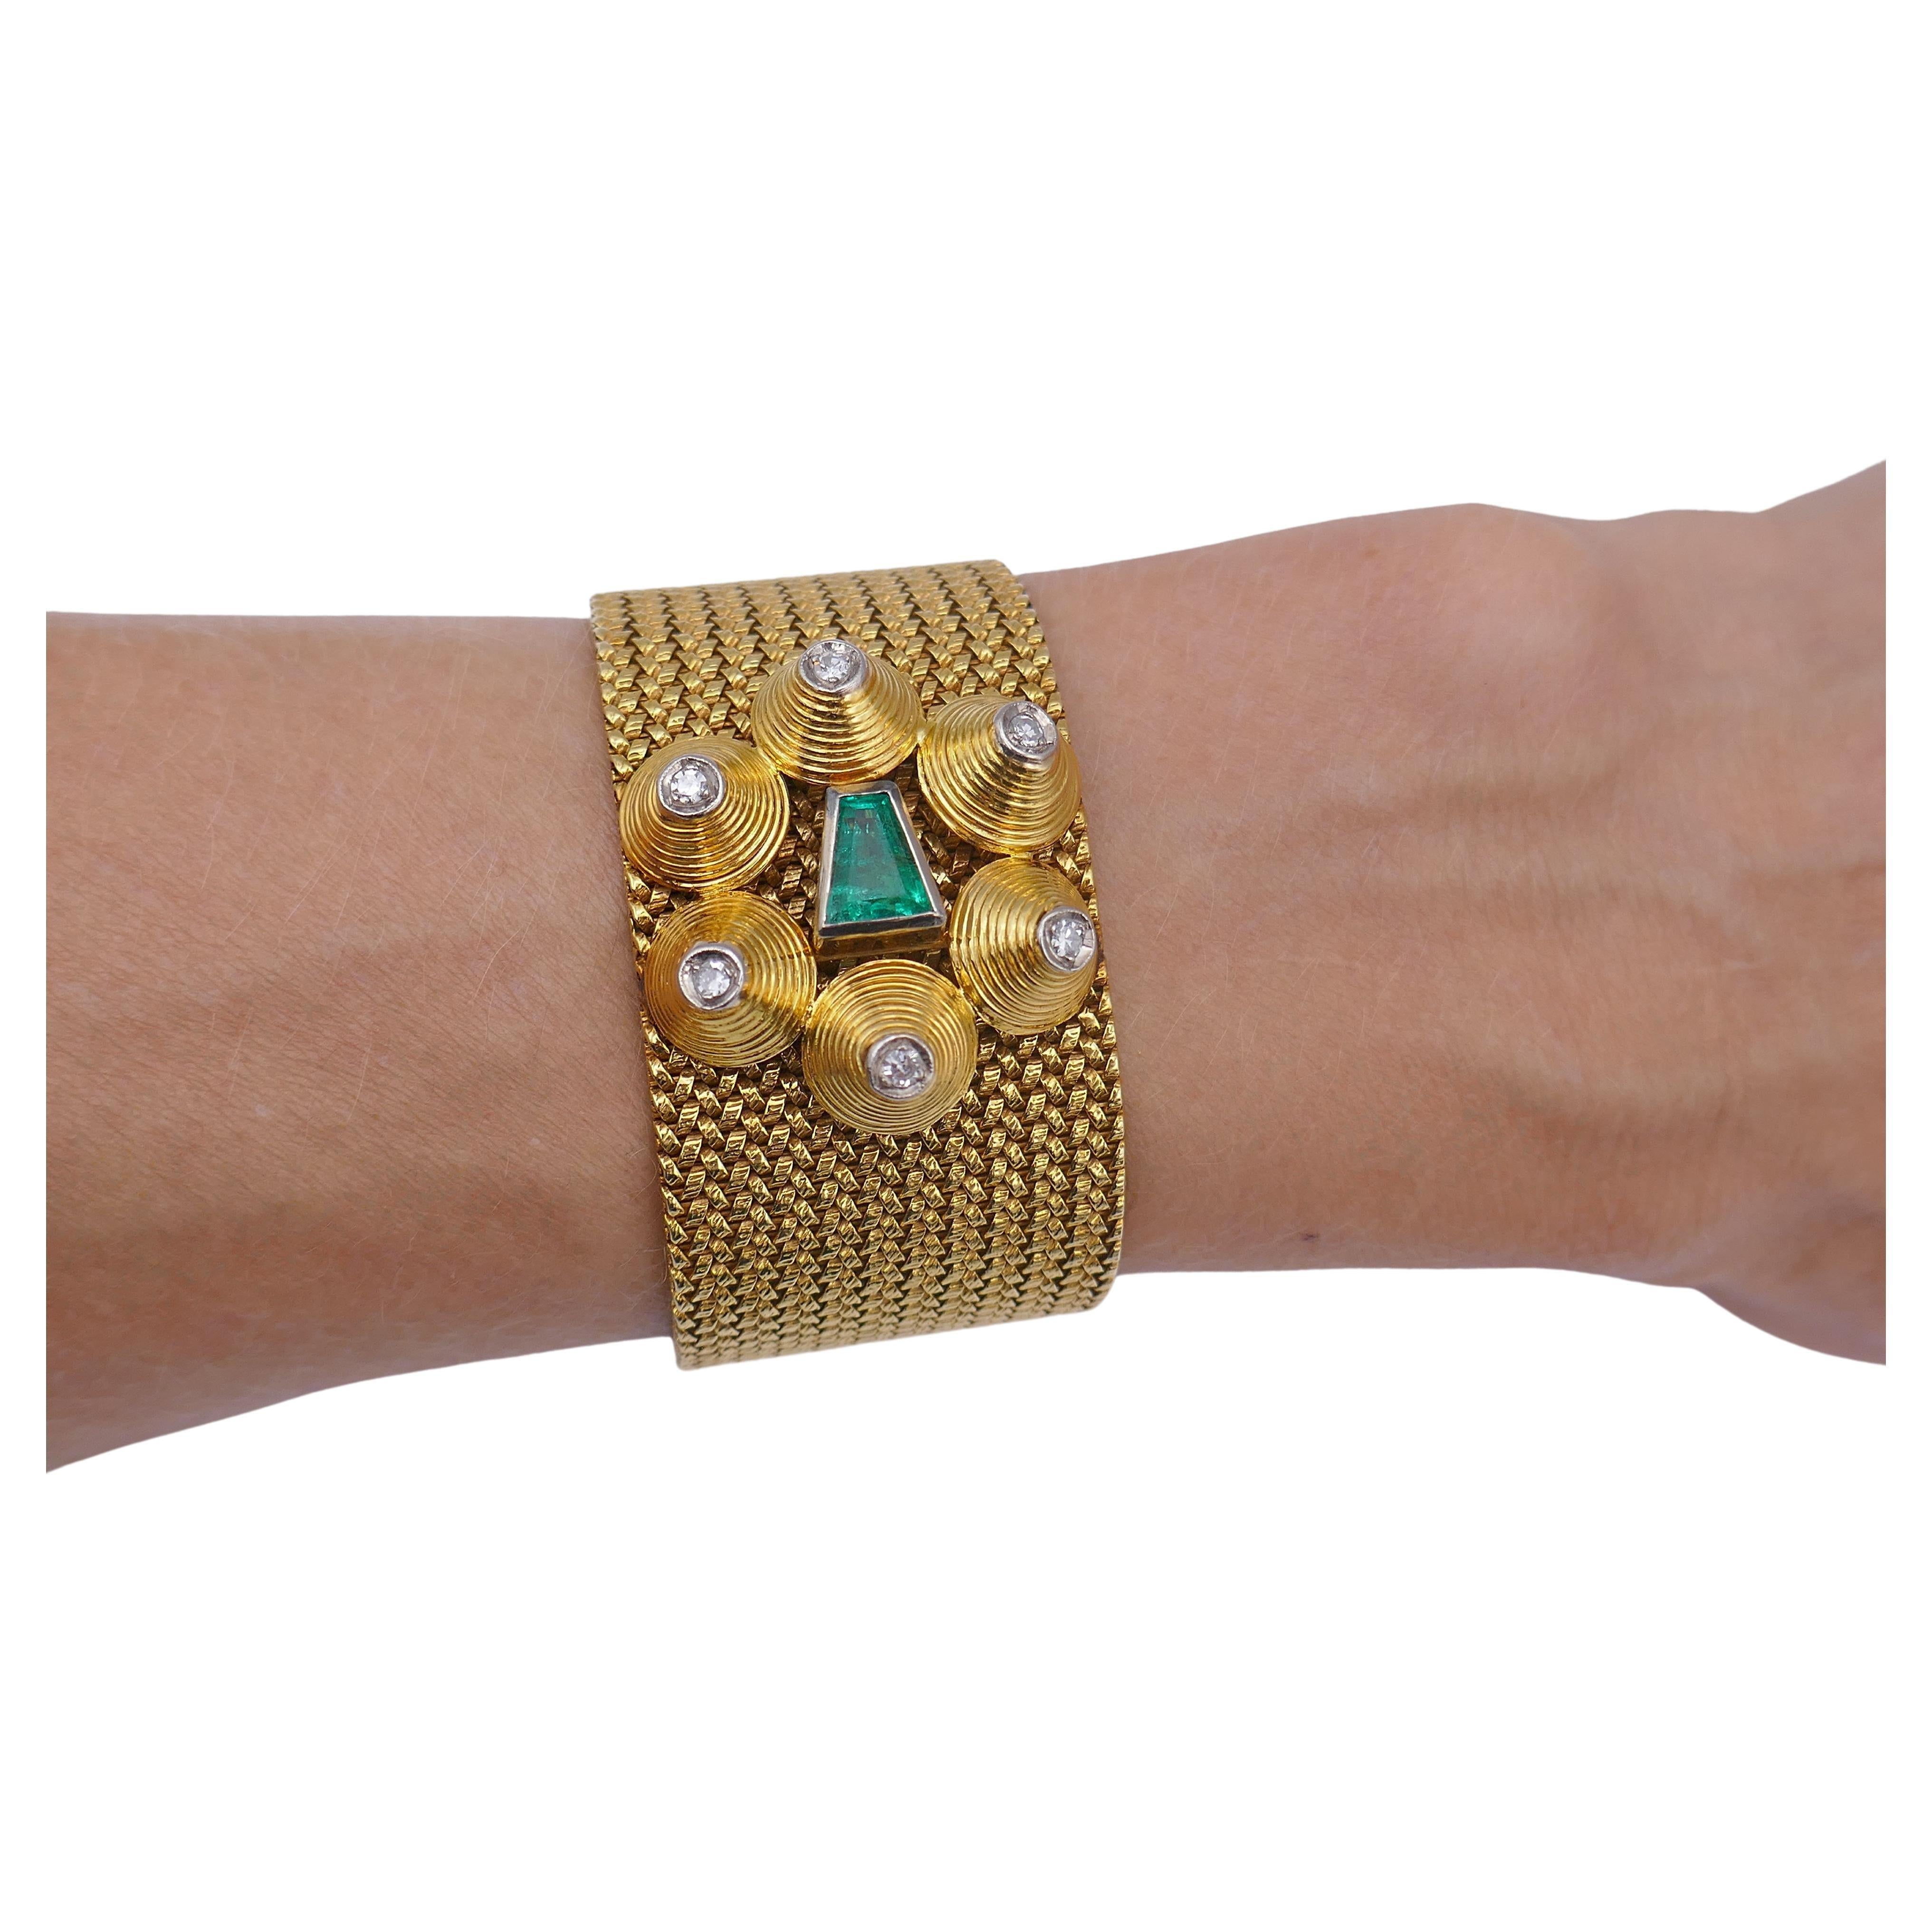 A fantastic antique 18k gold mesh bracelet, featuring emerald and diamond.
The bracelet is adorned with a unique geometric pattern comprises a circle of 6 gold pyramids. Each pyramid it topped with a diamond. In the center of the circle there is a